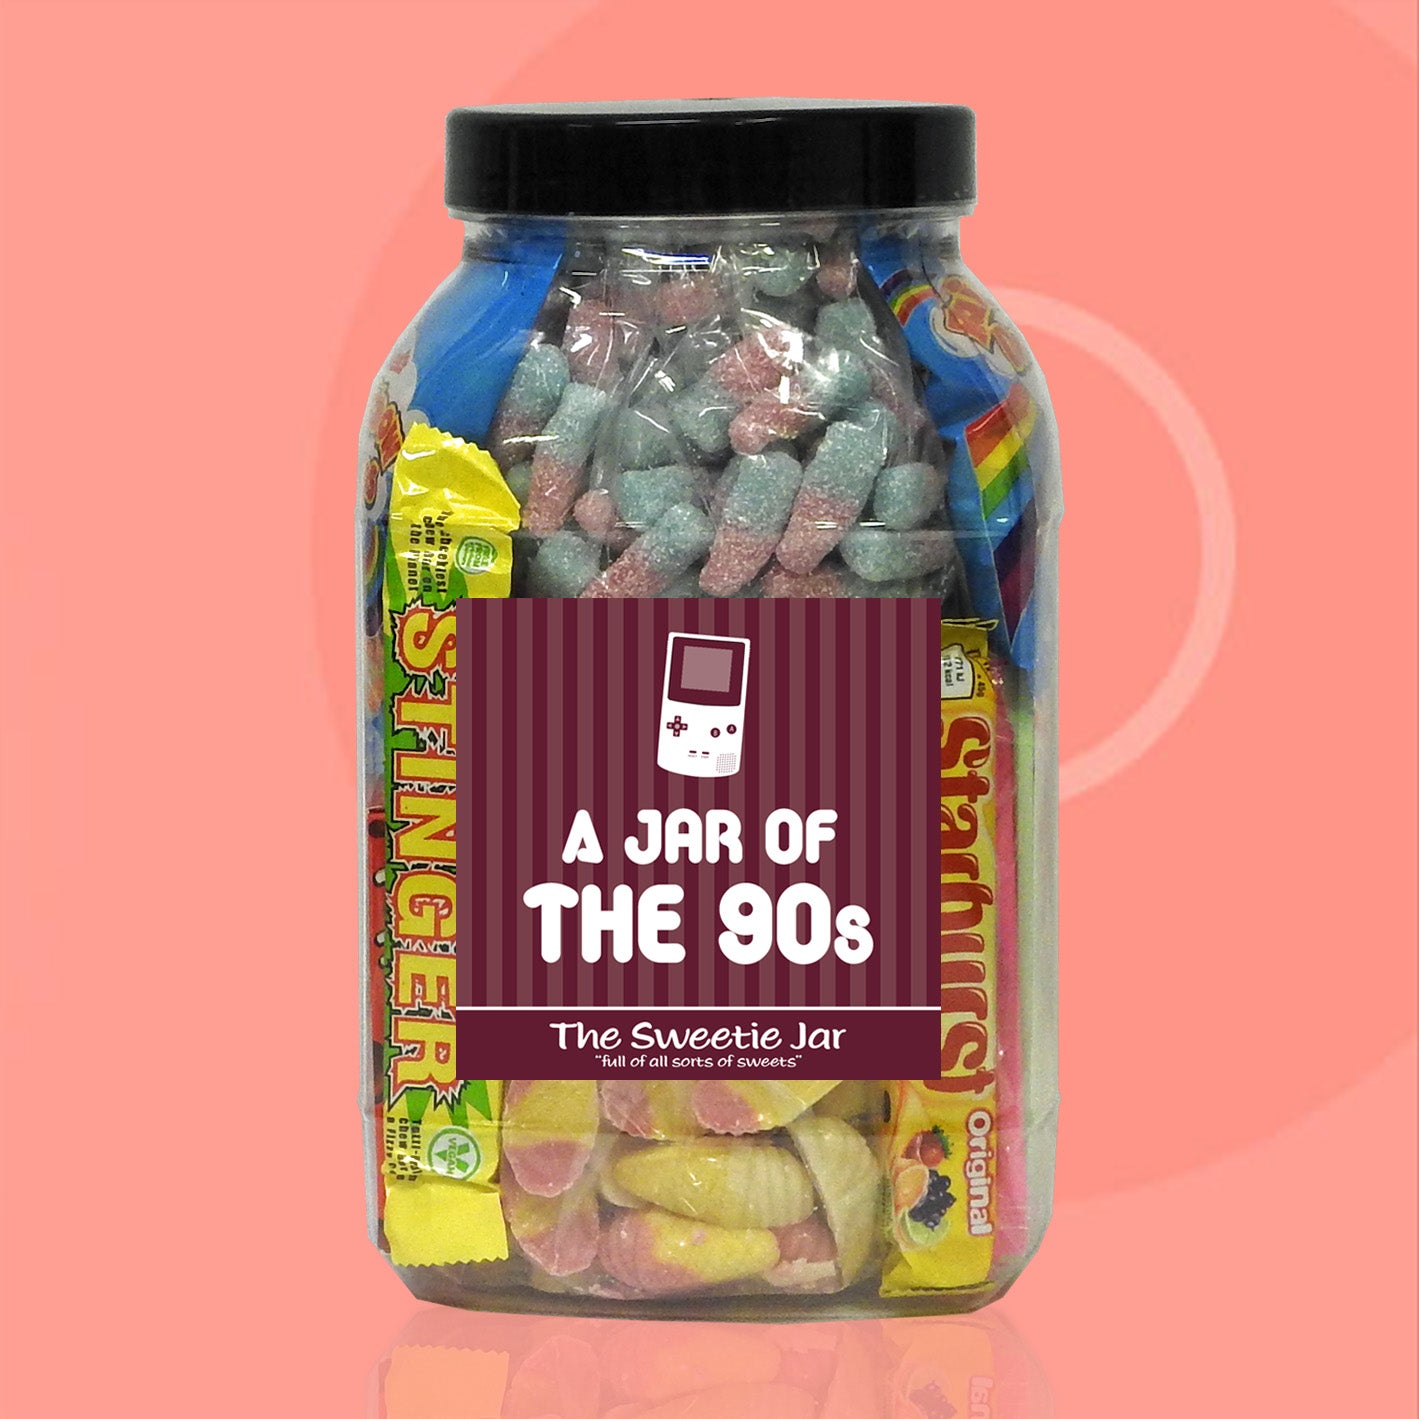 Unique Retro Sweet Gift Jars filled with chews or jelly sweets, liquorice or chocolate treats or old fashioned retro sweets classics.